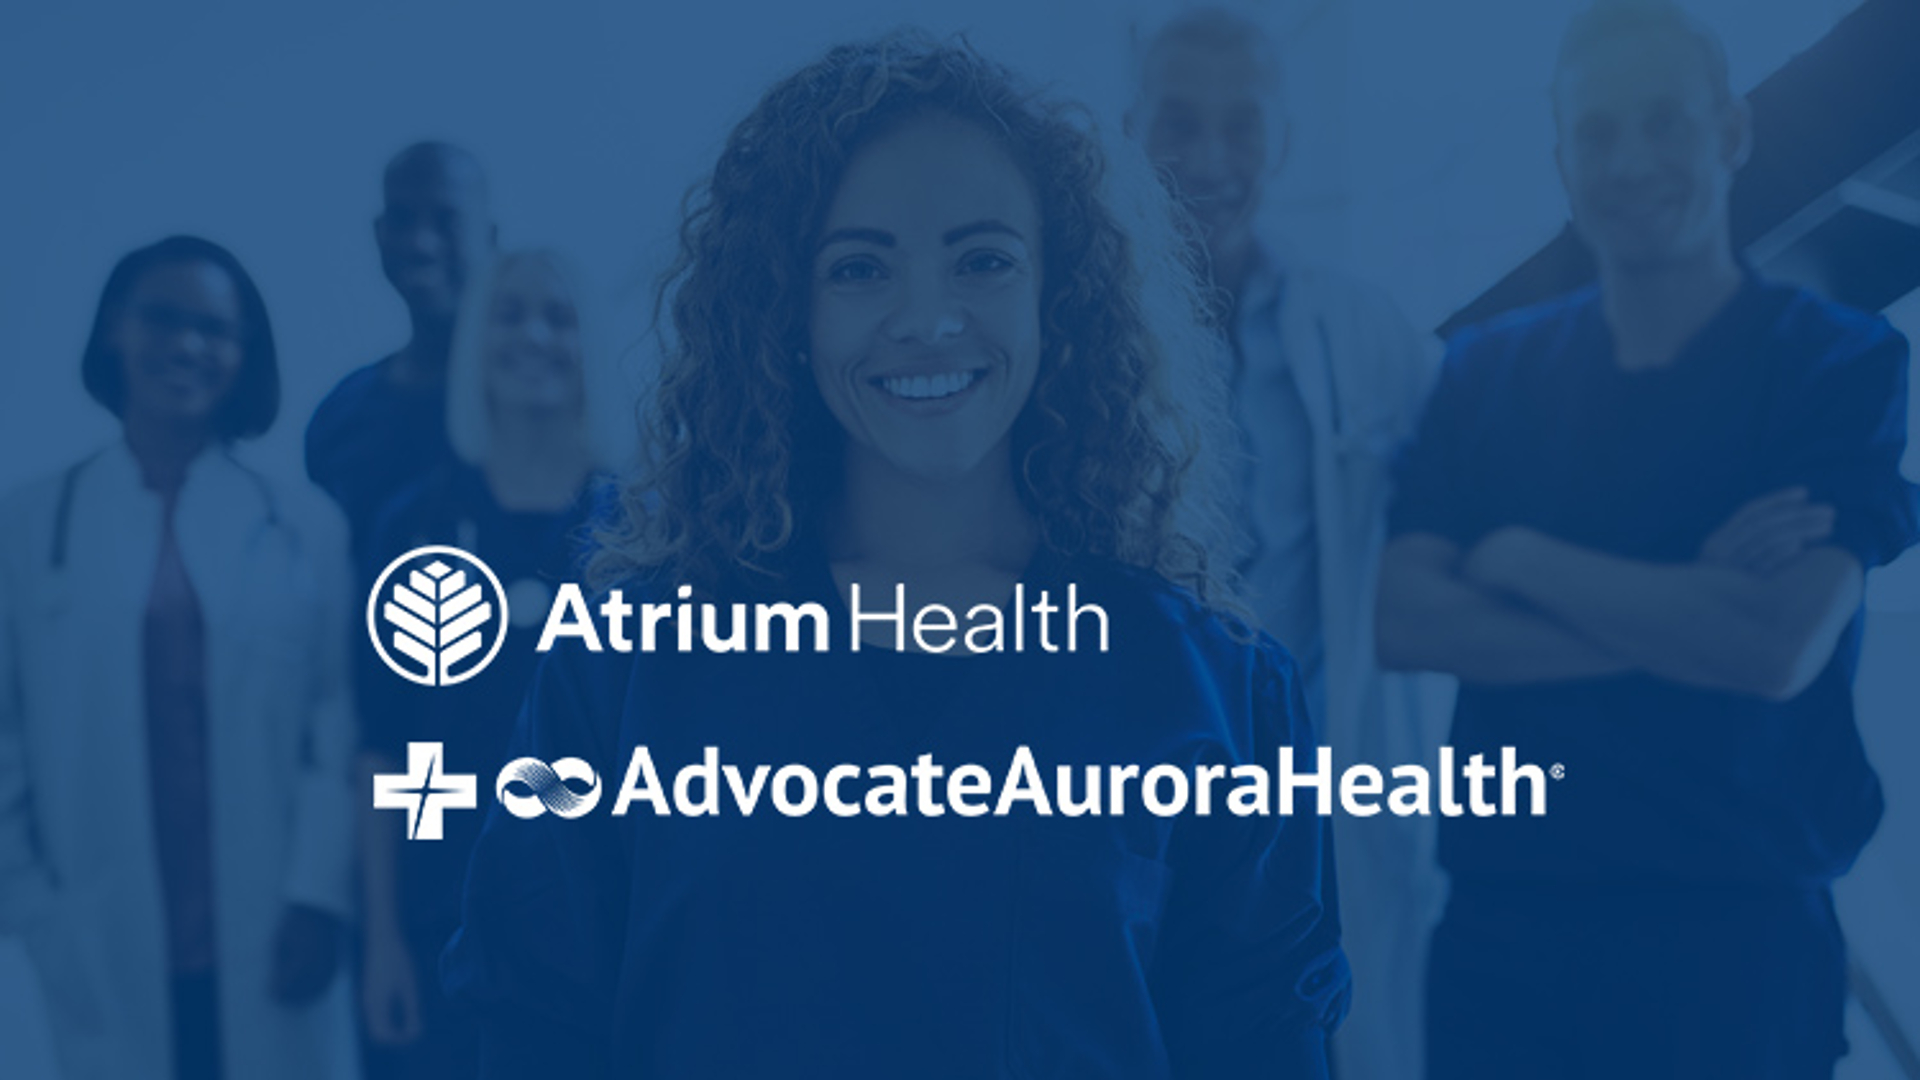 Advocate Aurora Health and Atrium Health announced today their plans to come together to create a leading health and wellness delivery system to best meet patients’ needs by redefining how, when and where care is delivered.